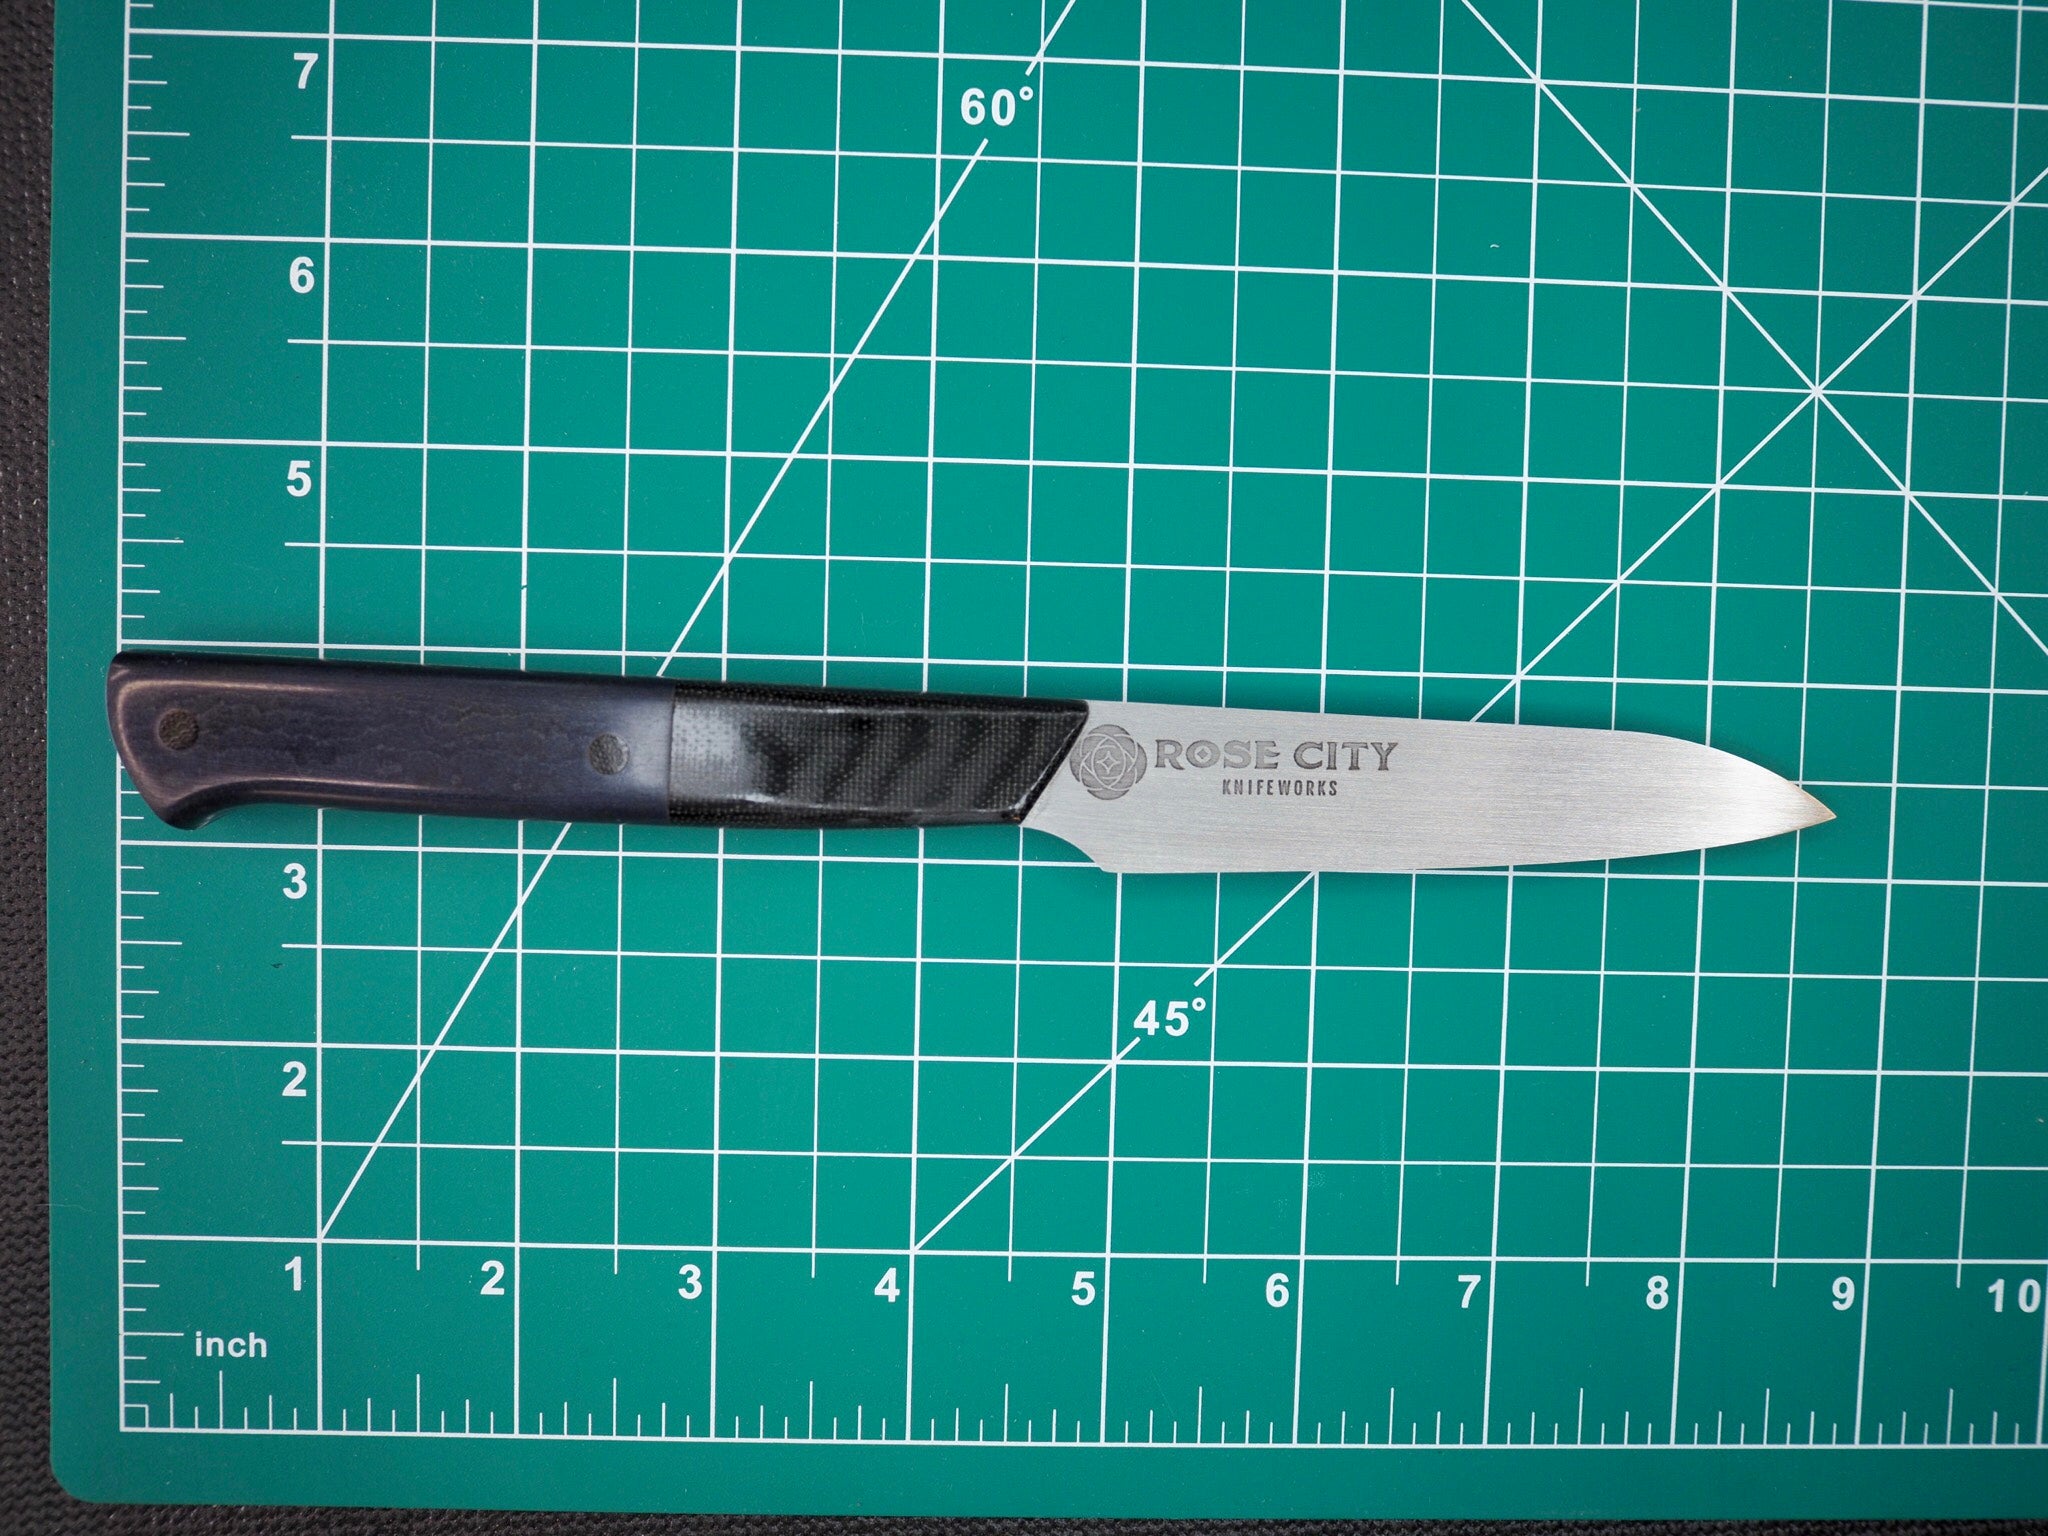 The Best Paring Knife You've Ever Owned - Blue Brigade-Style